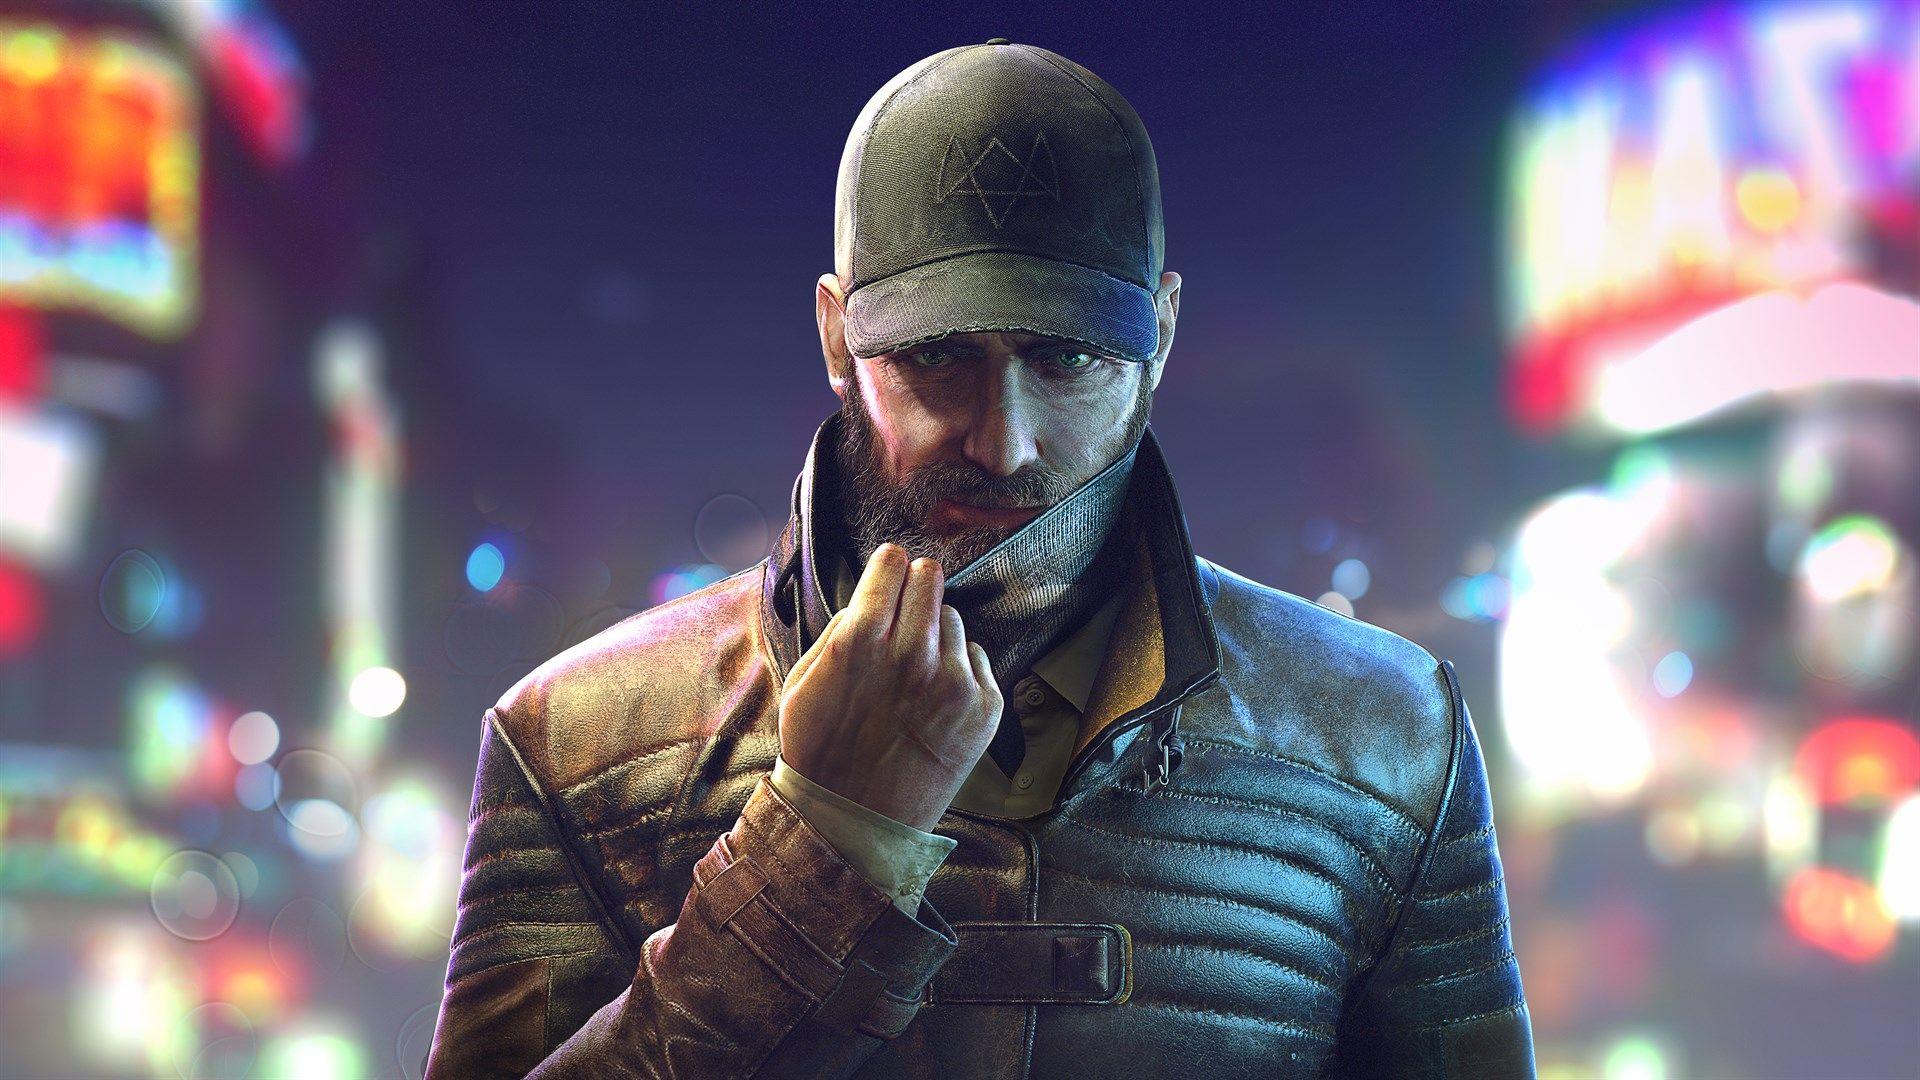 Watch Dogs: Legion adds in Aiden Pearce, Wrench and a whole new story